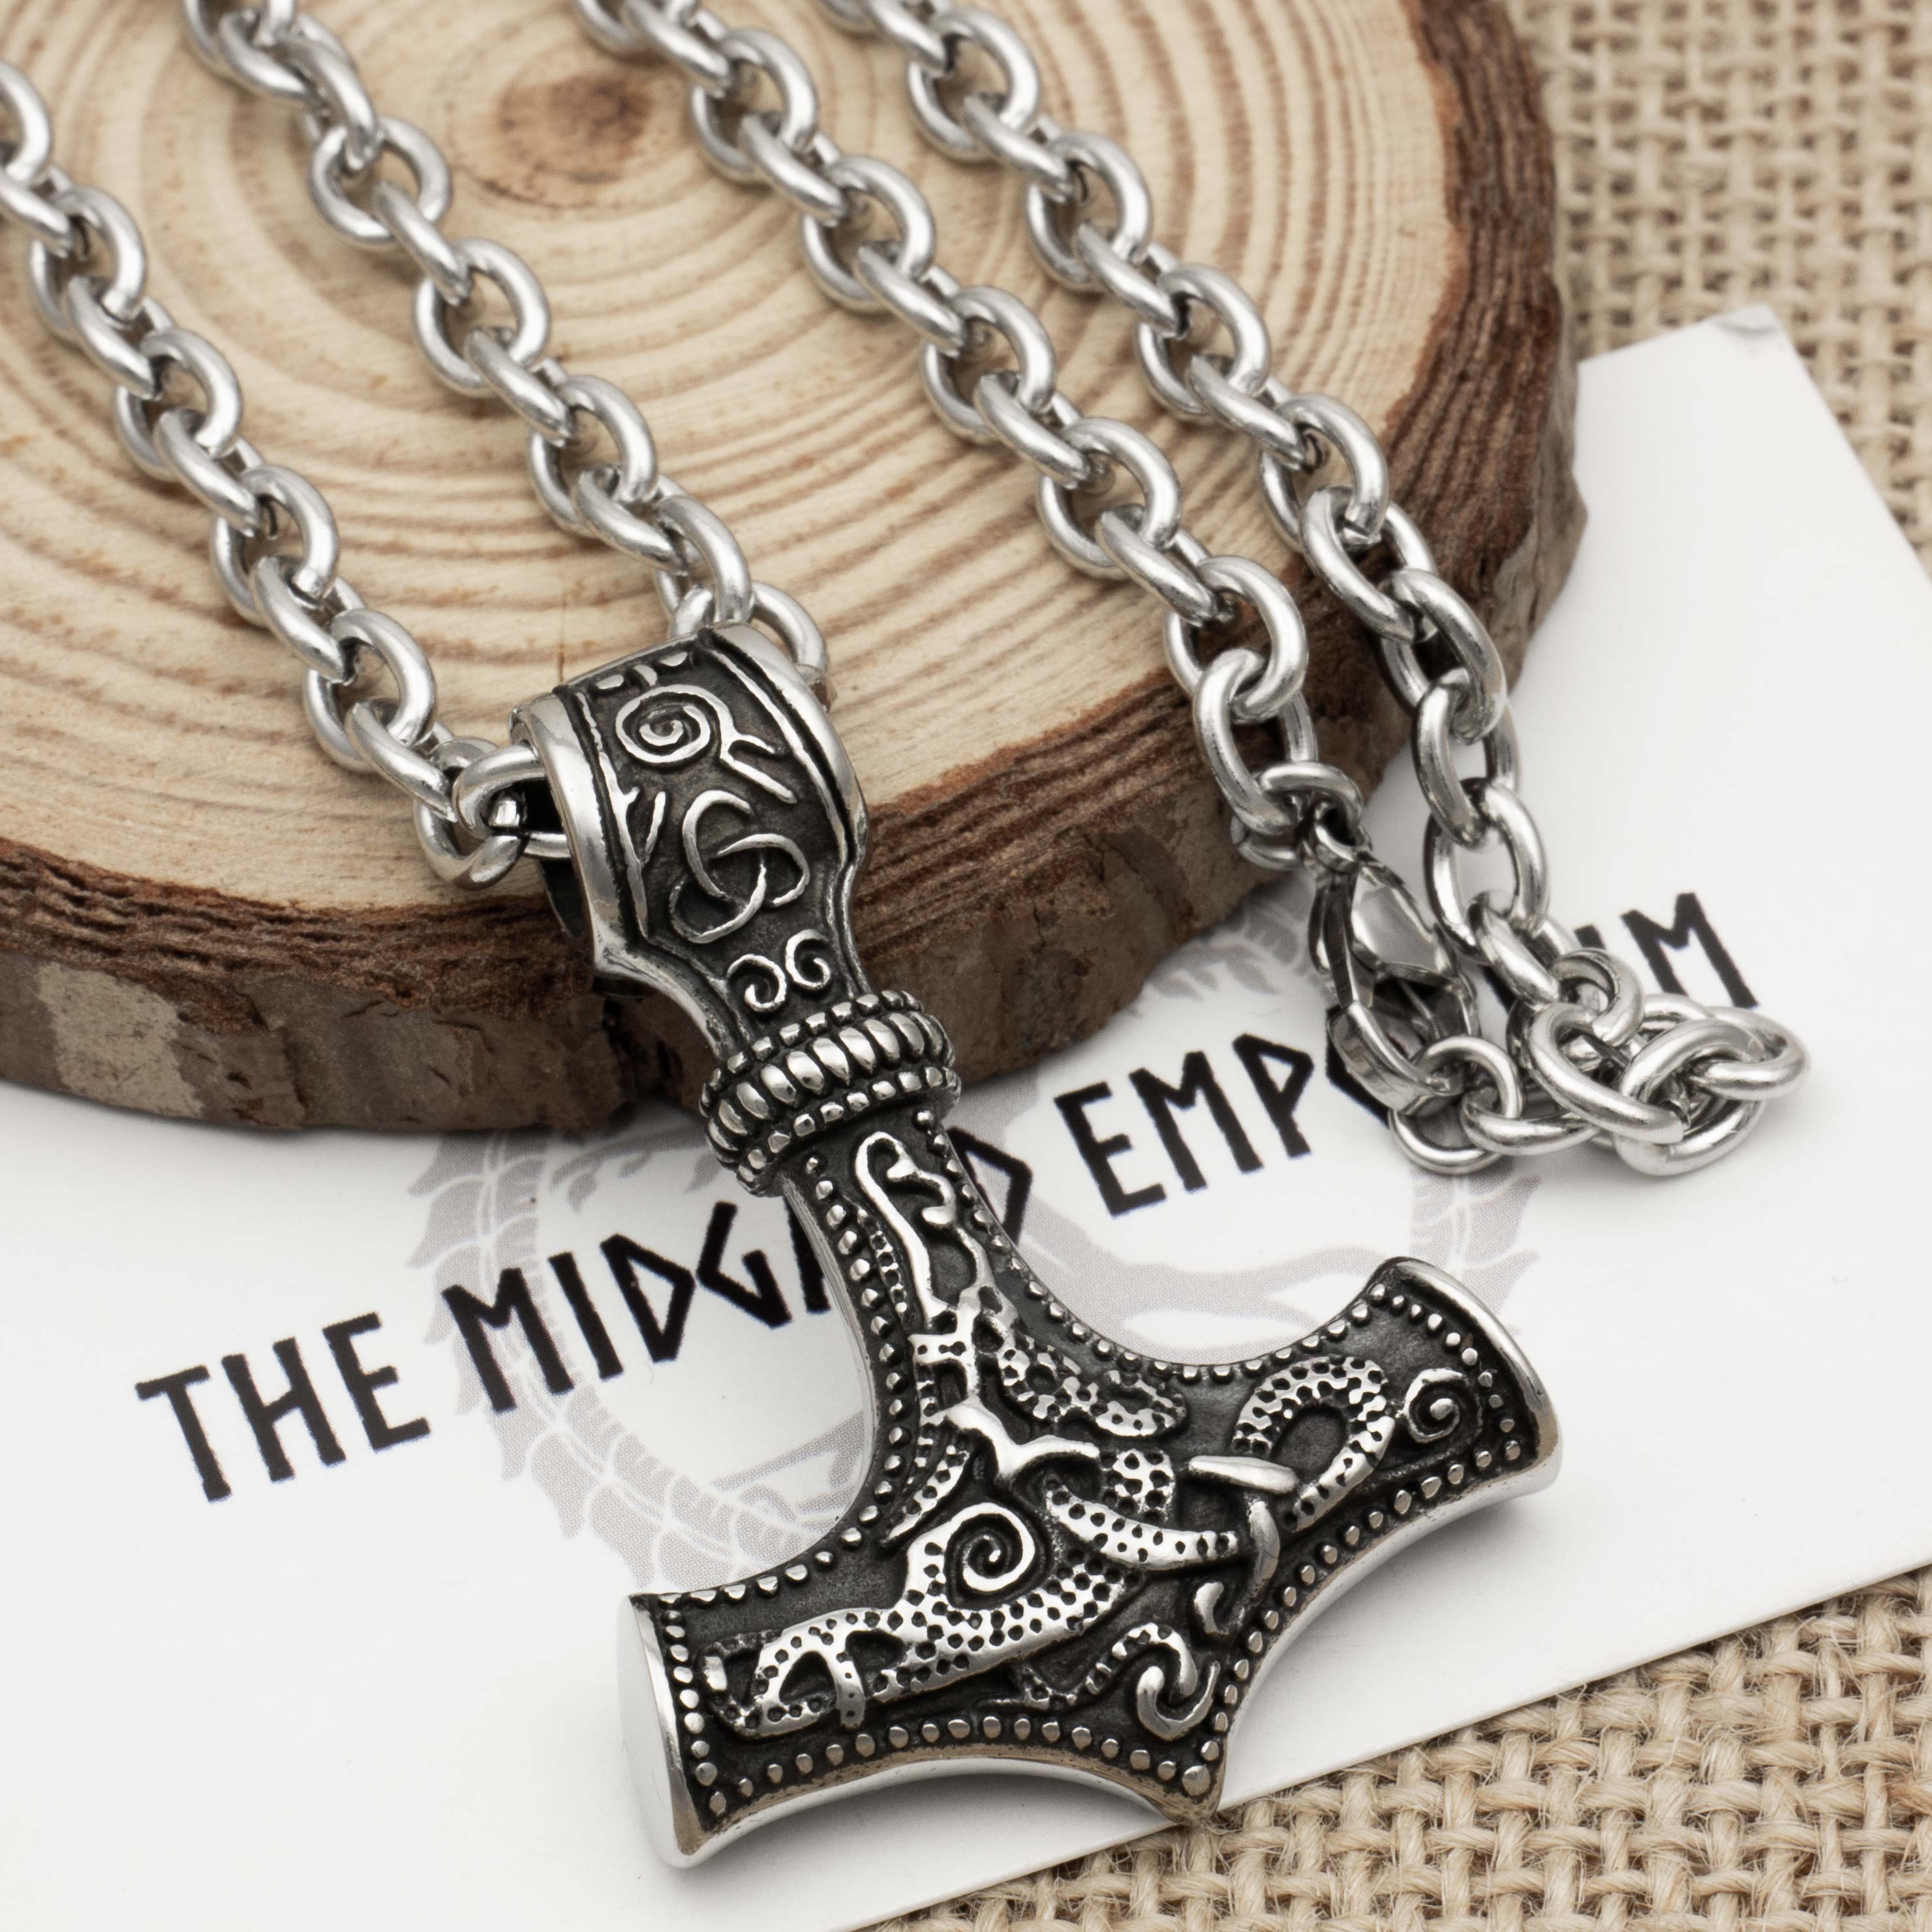 BAVIPOWER] Mjolnir Thor Hammer Necklace: A jewelry that protects you | by  BaviPower | Medium